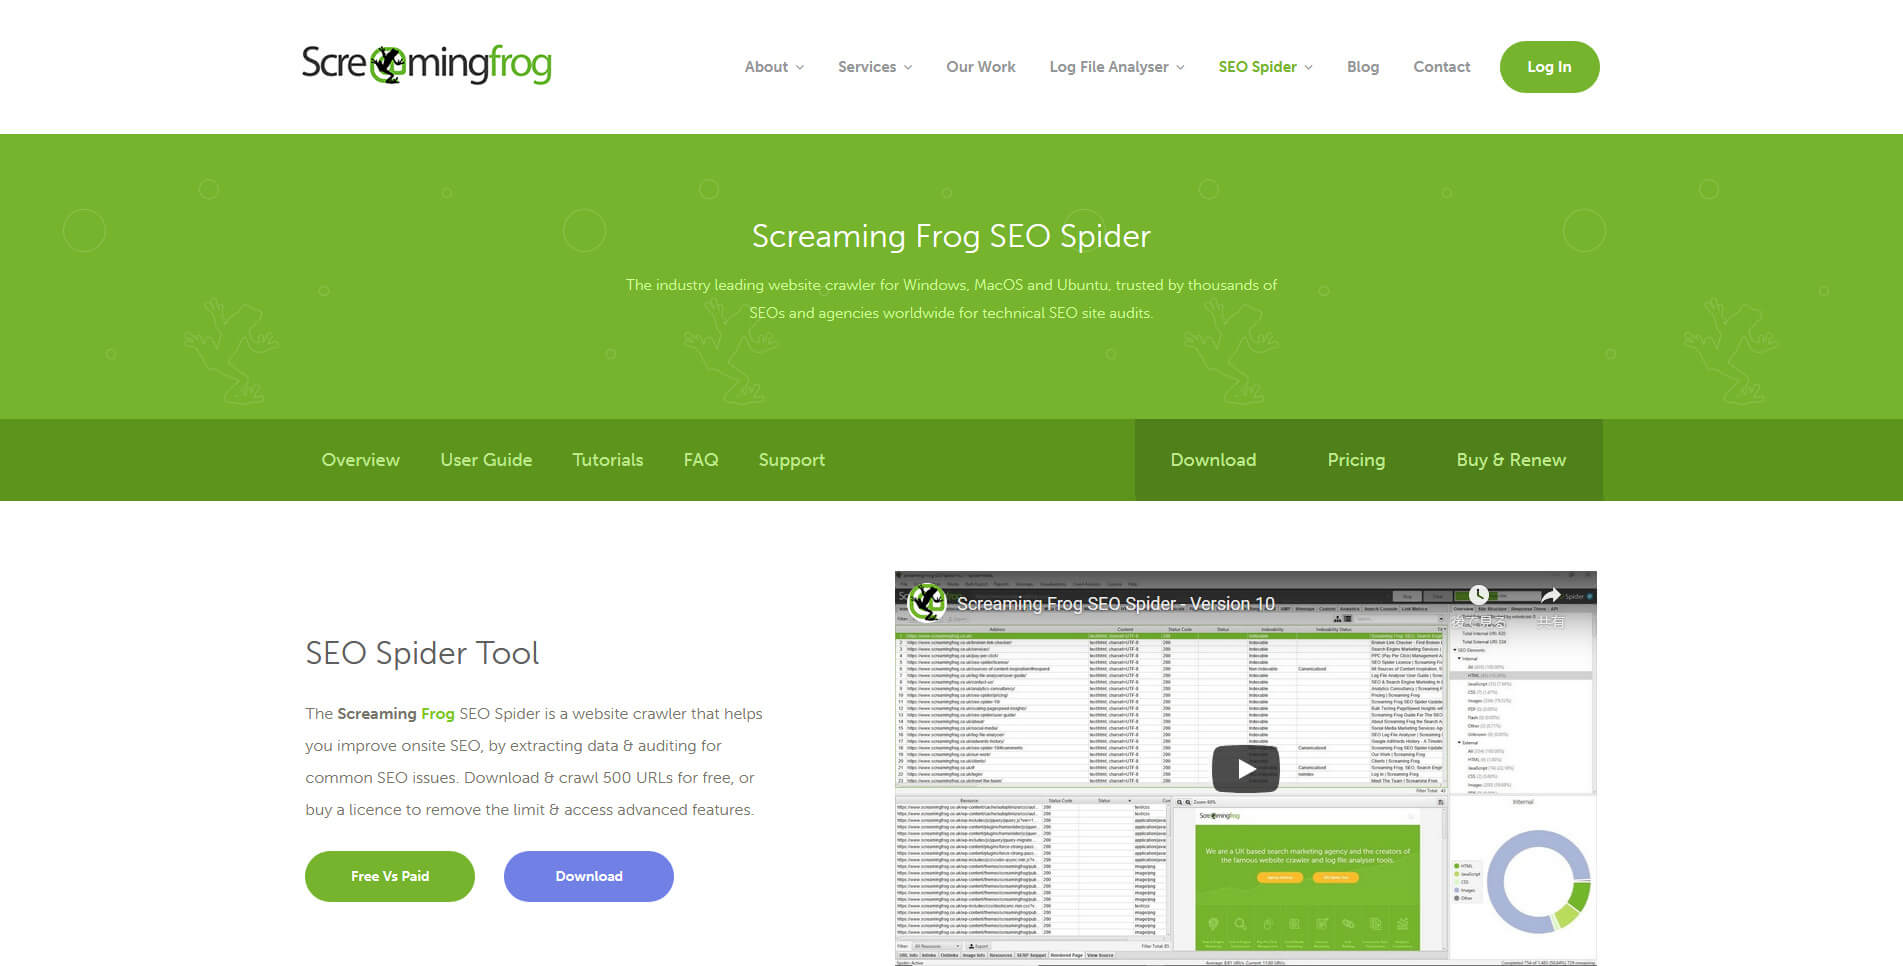  Screaming Frog SEO Spider Tool